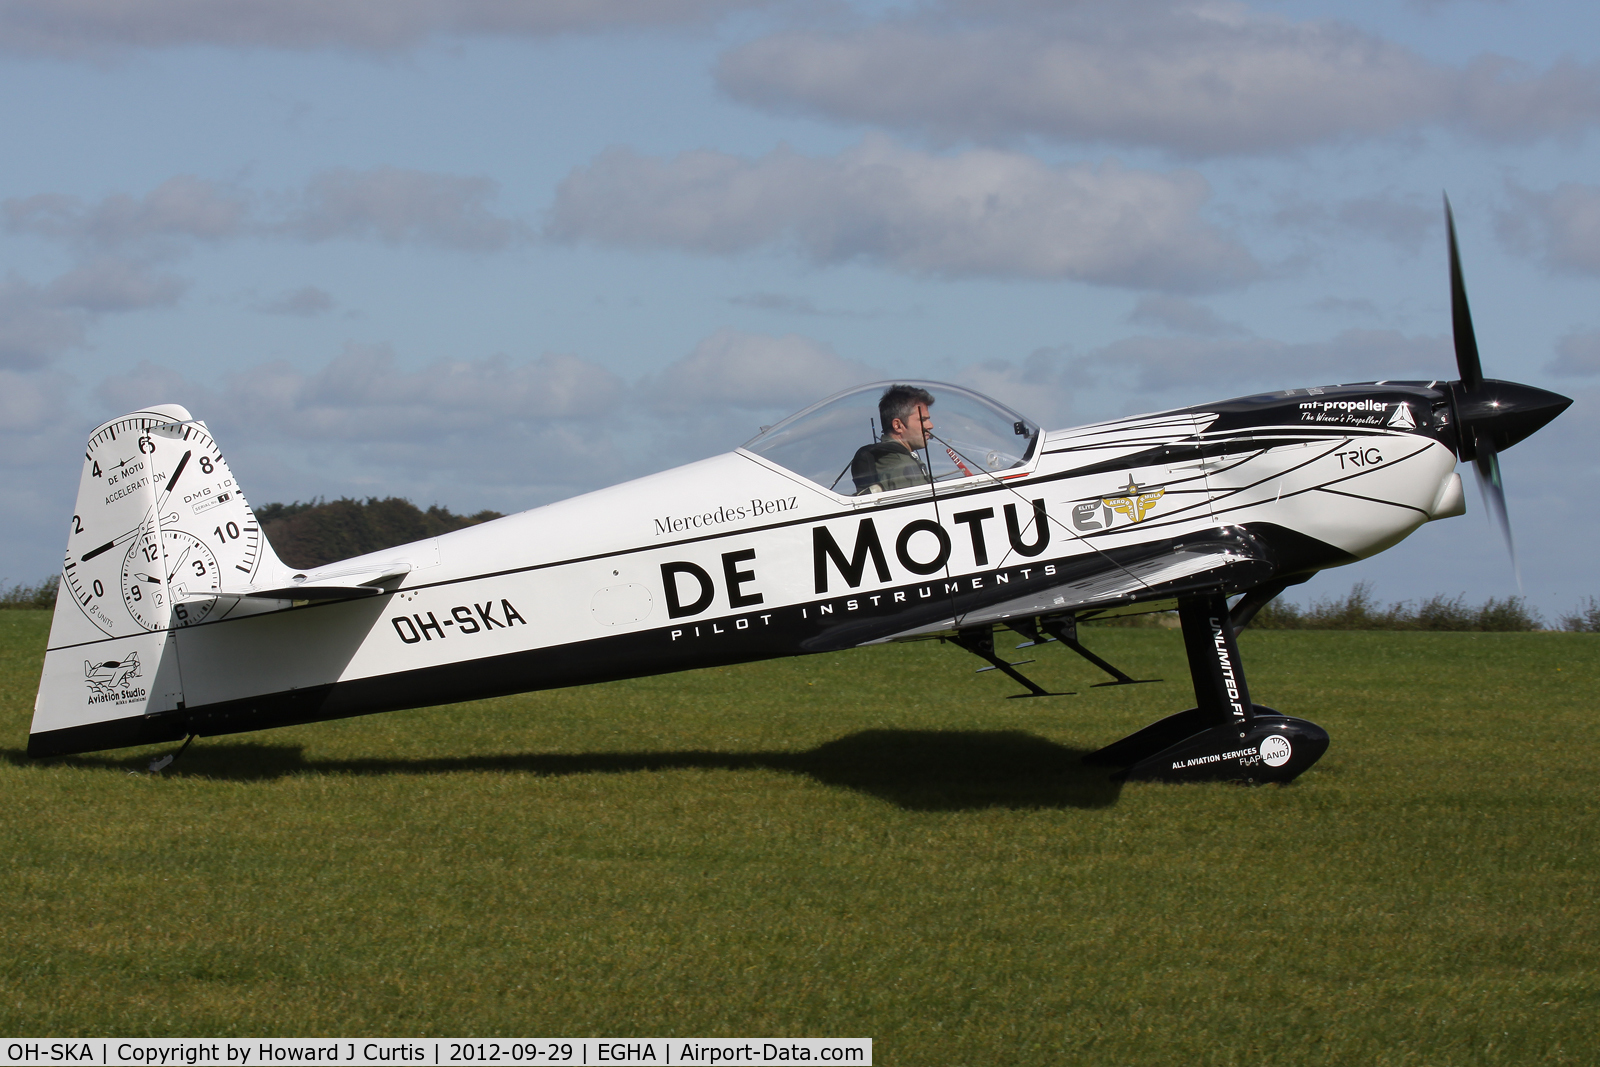 OH-SKA, 2007 Mudry CAP-232 C/N 30, Privately owned. UK-based (currently).